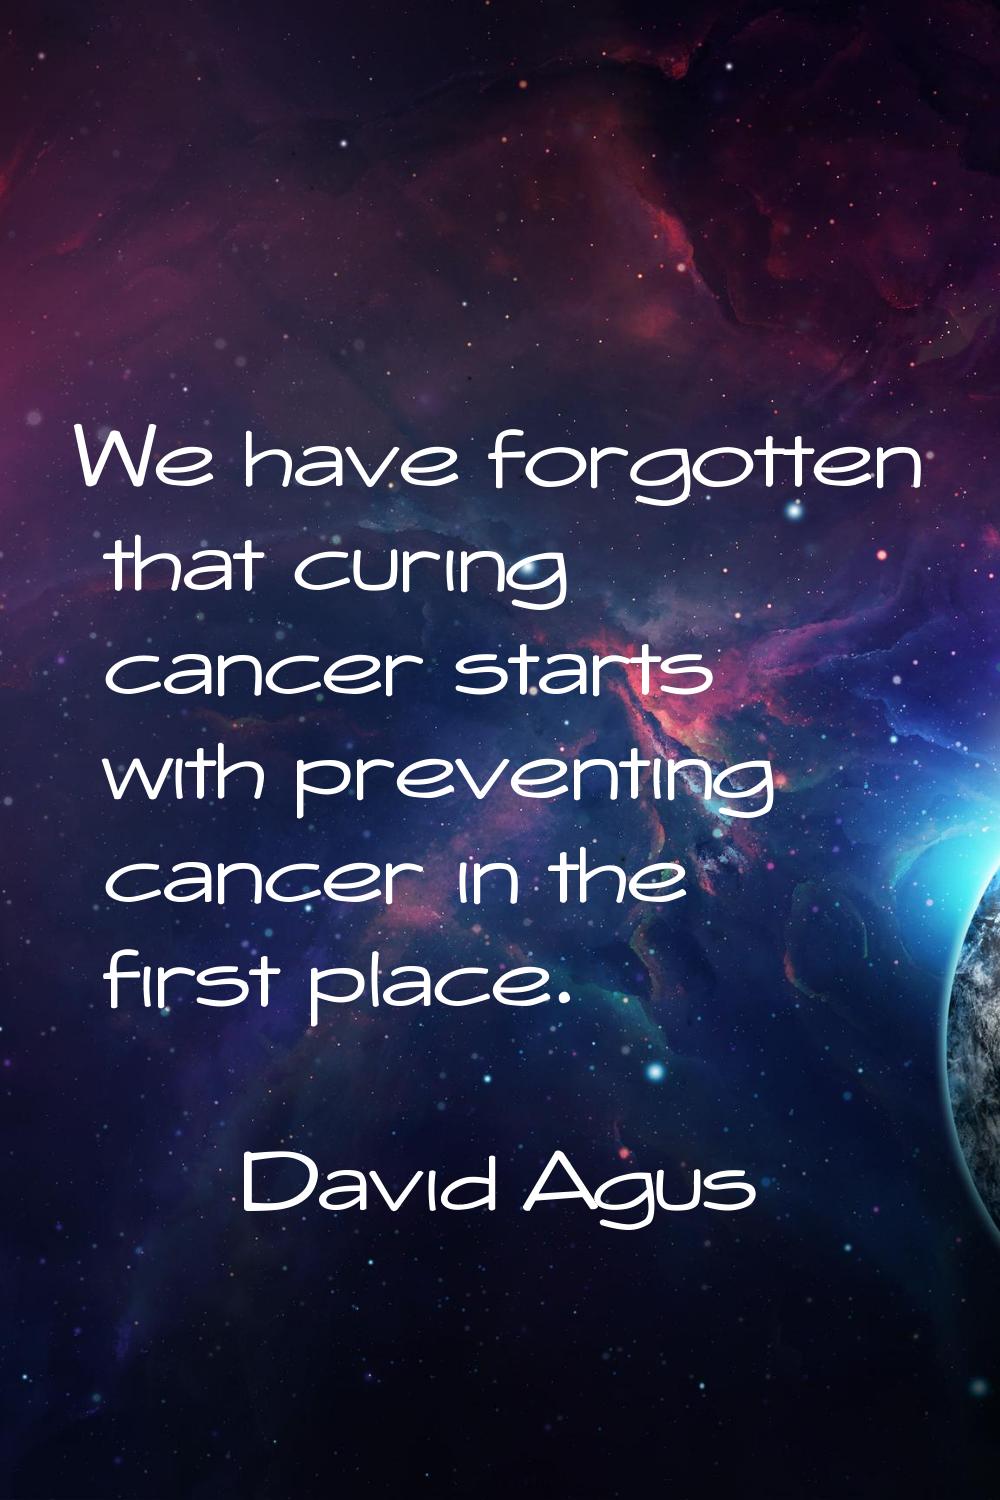 We have forgotten that curing cancer starts with preventing cancer in the first place.